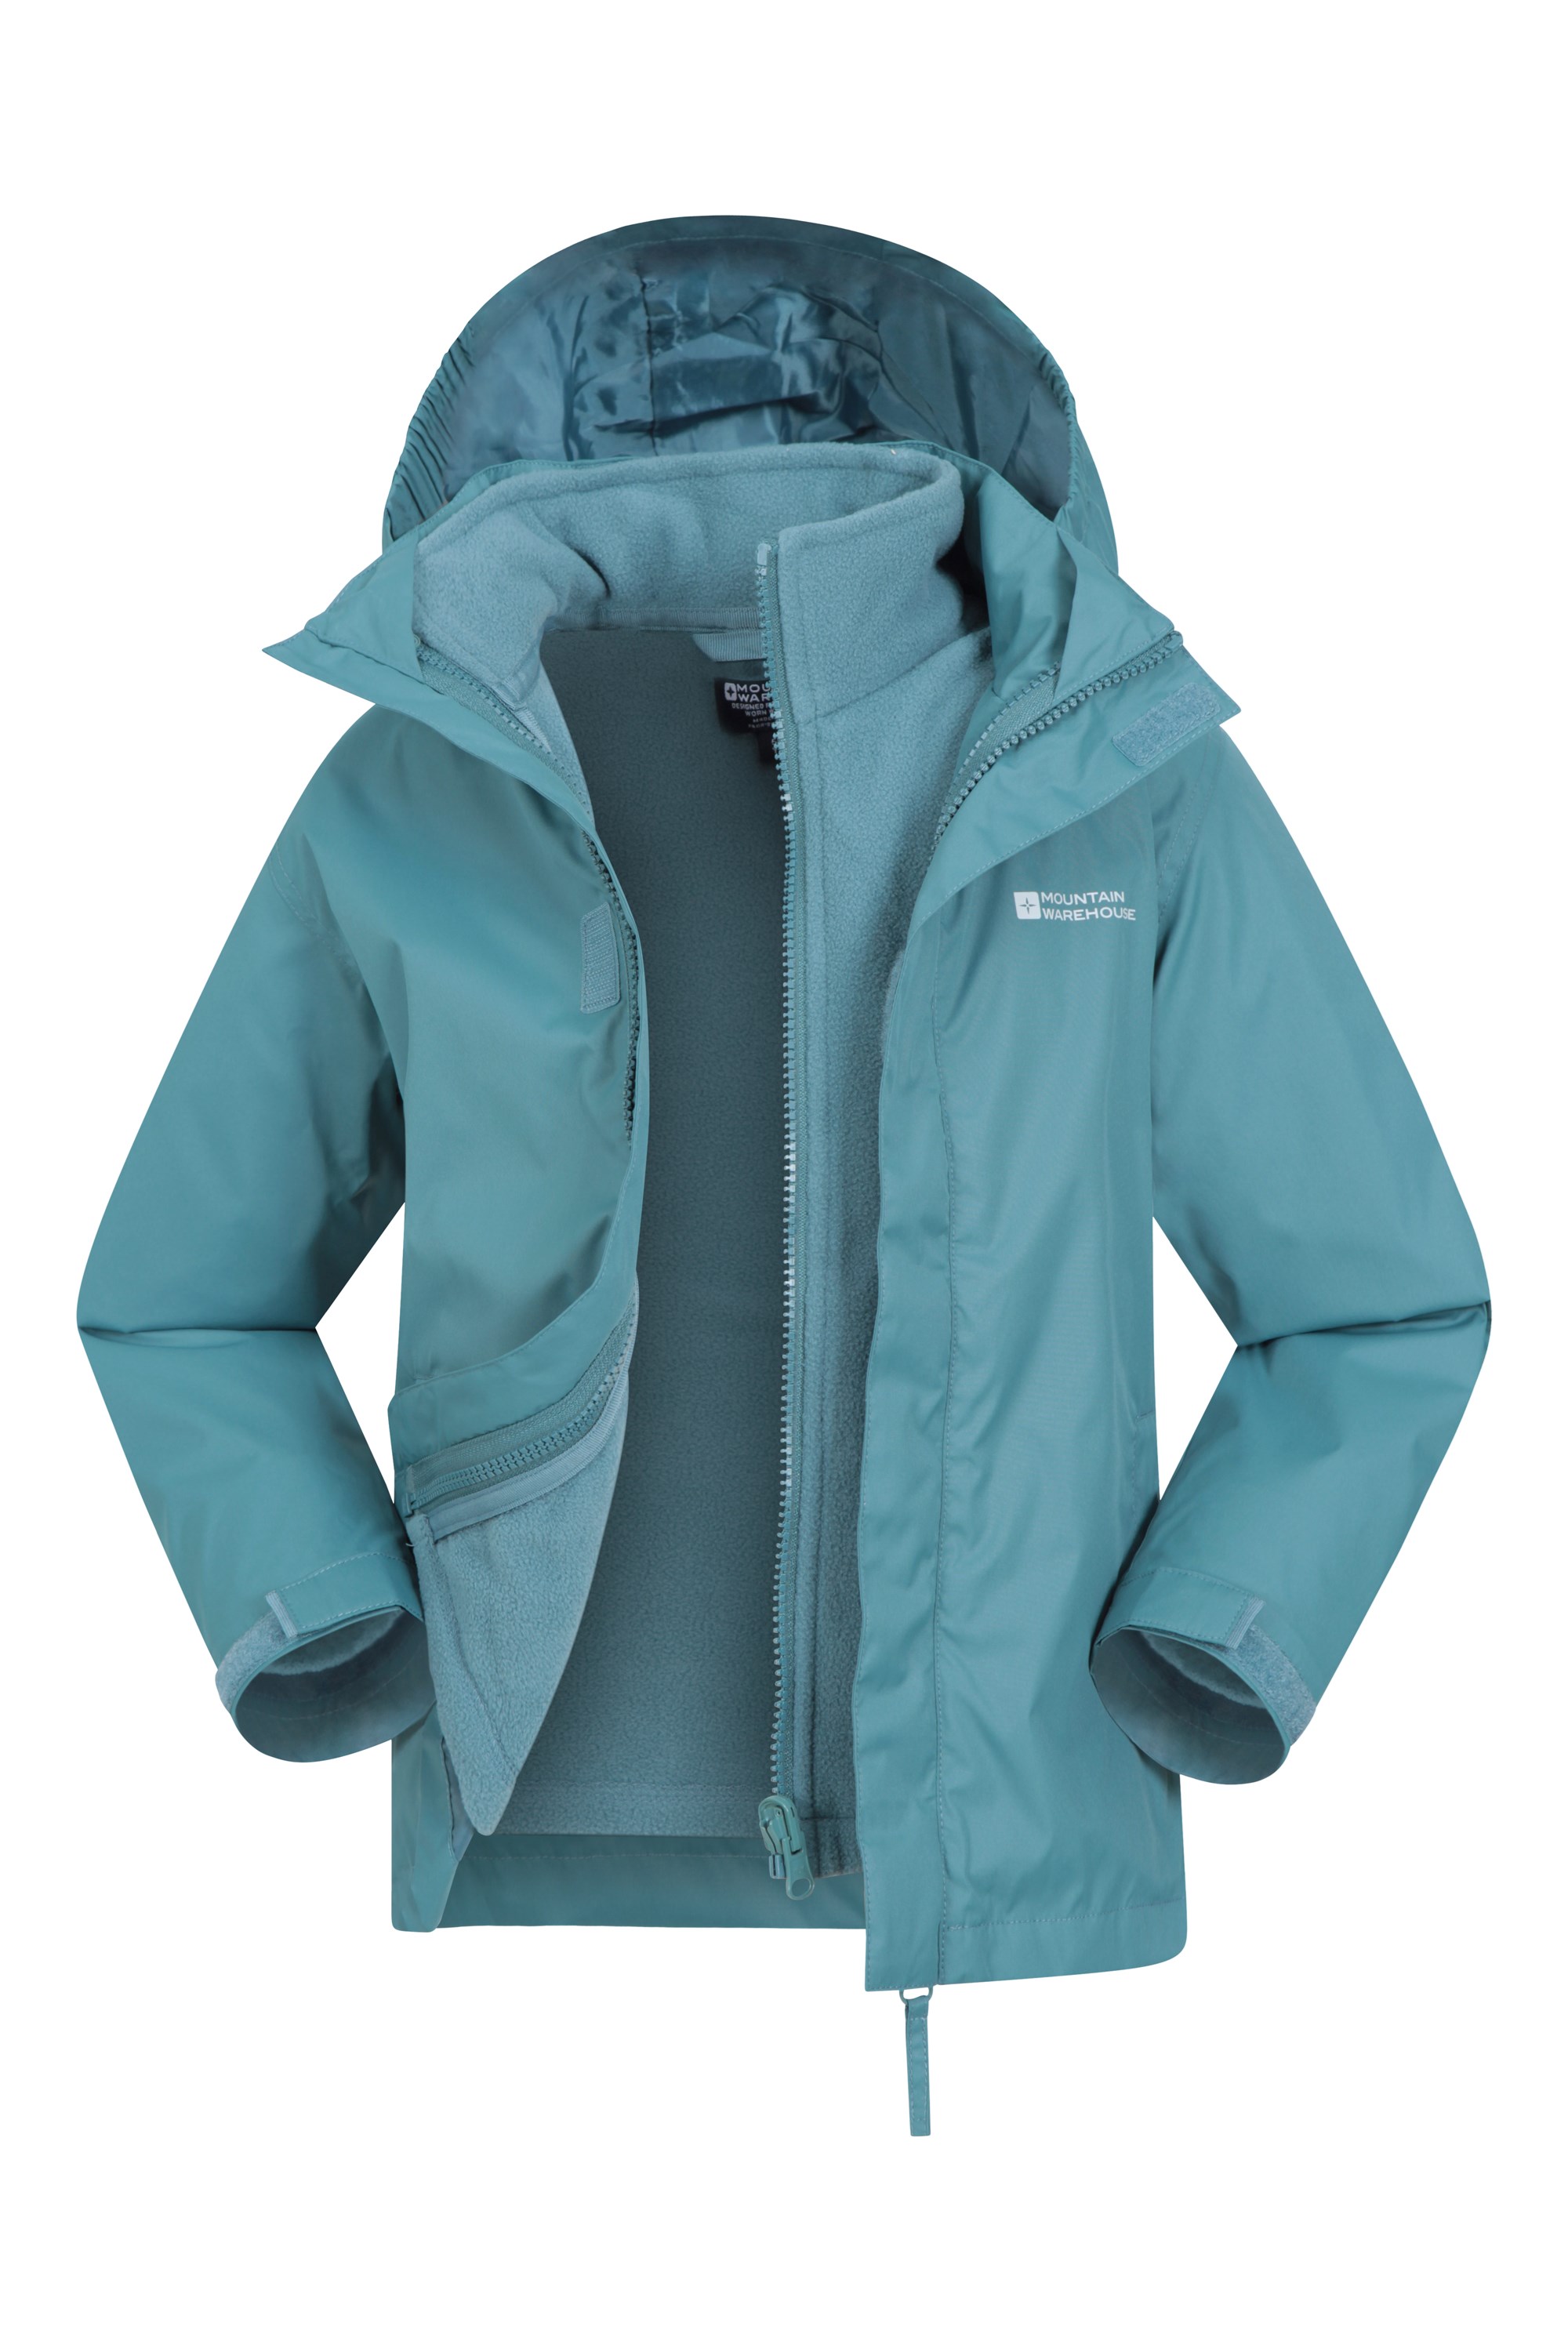 crack Panter Mindful Kids 3 In 1 Jackets | Mountain Warehouse US